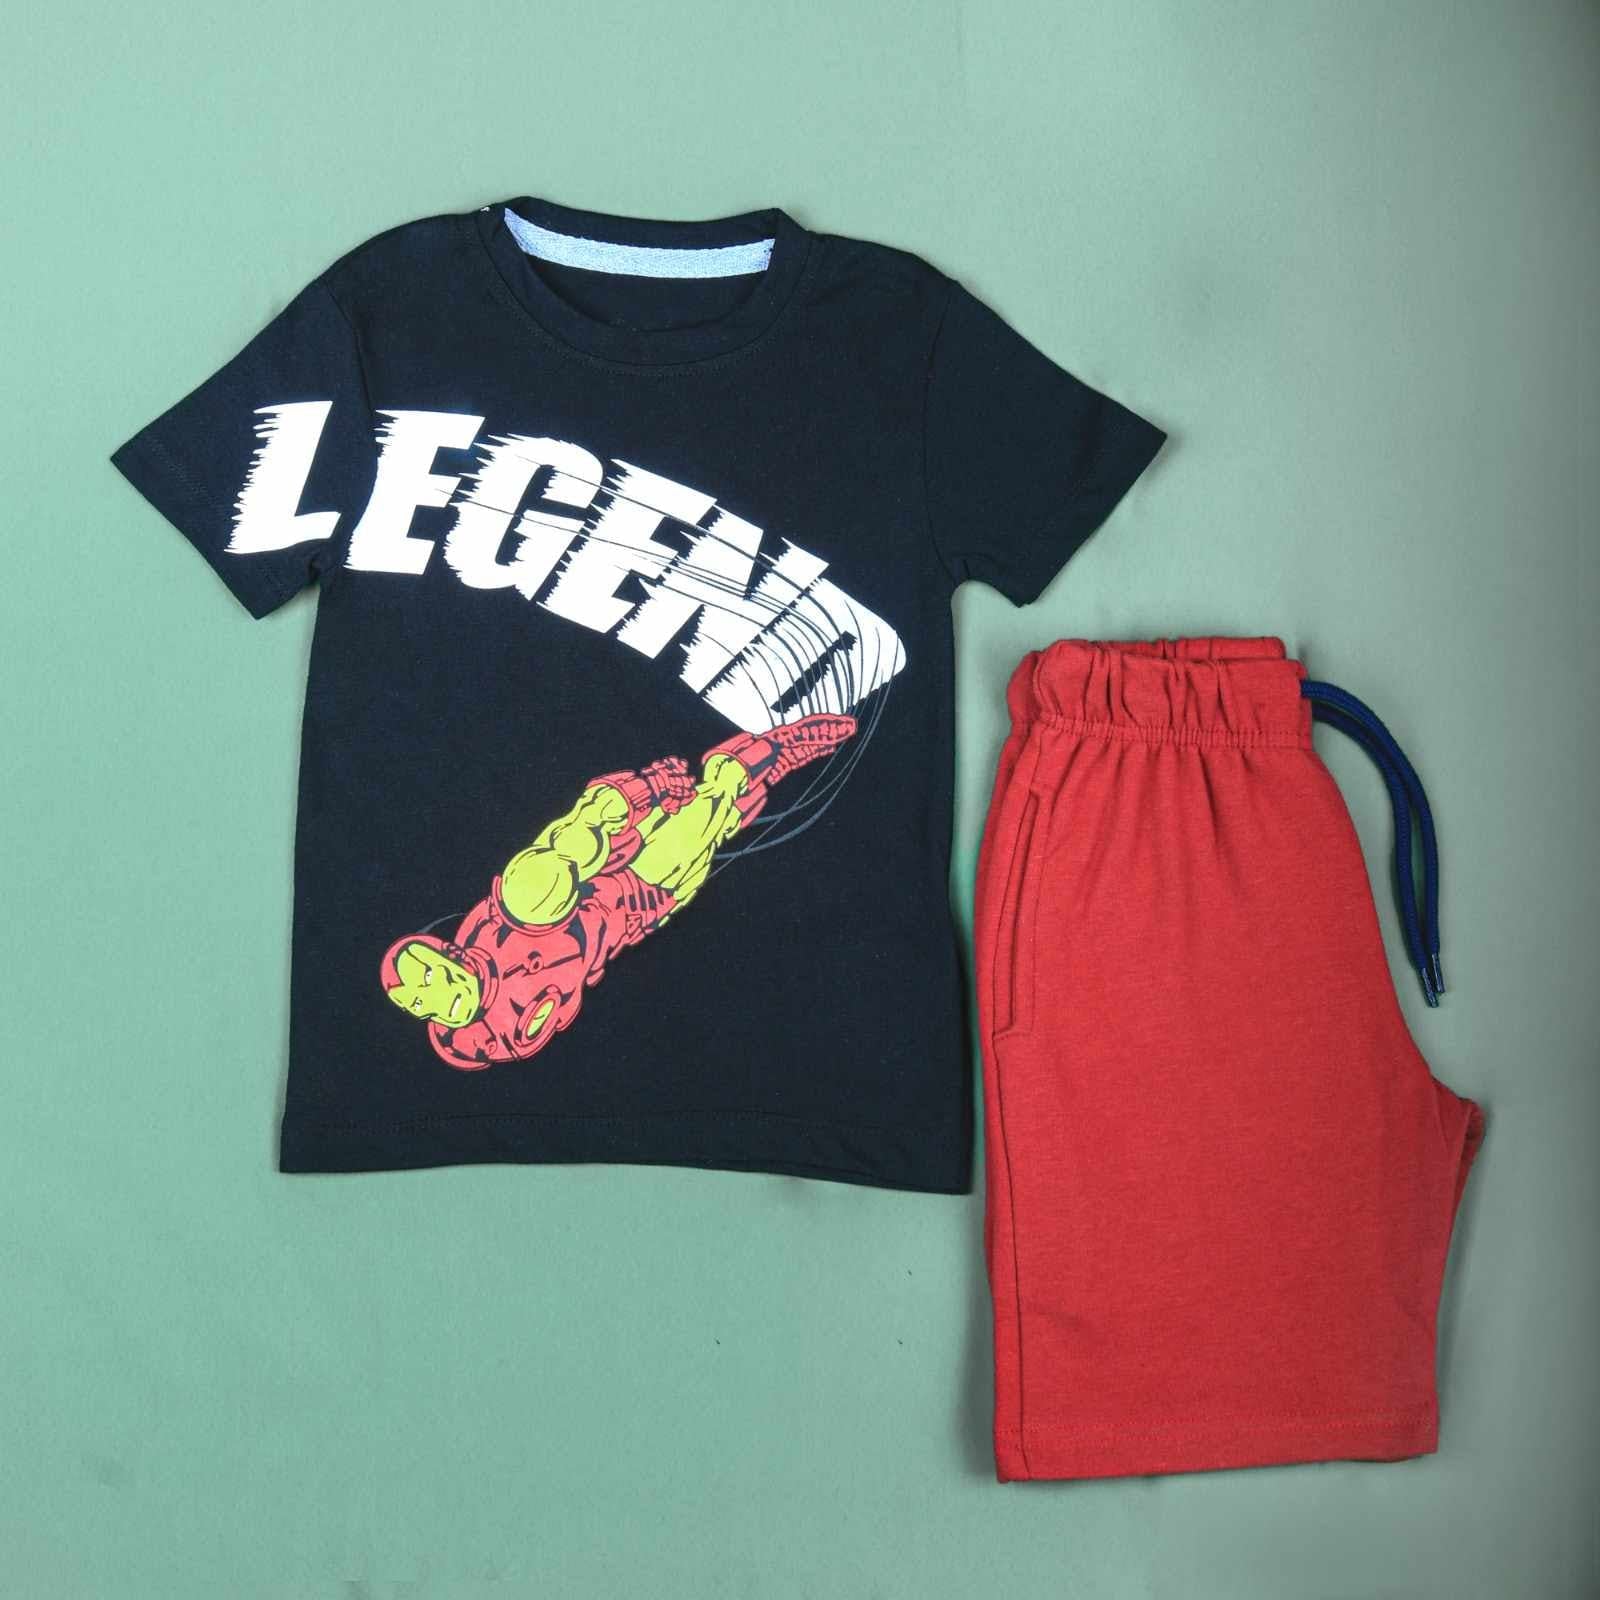  A young boy wearing a black Pebbles Iron Man T-shirt and red shorts, standing confidently with a determined expression.